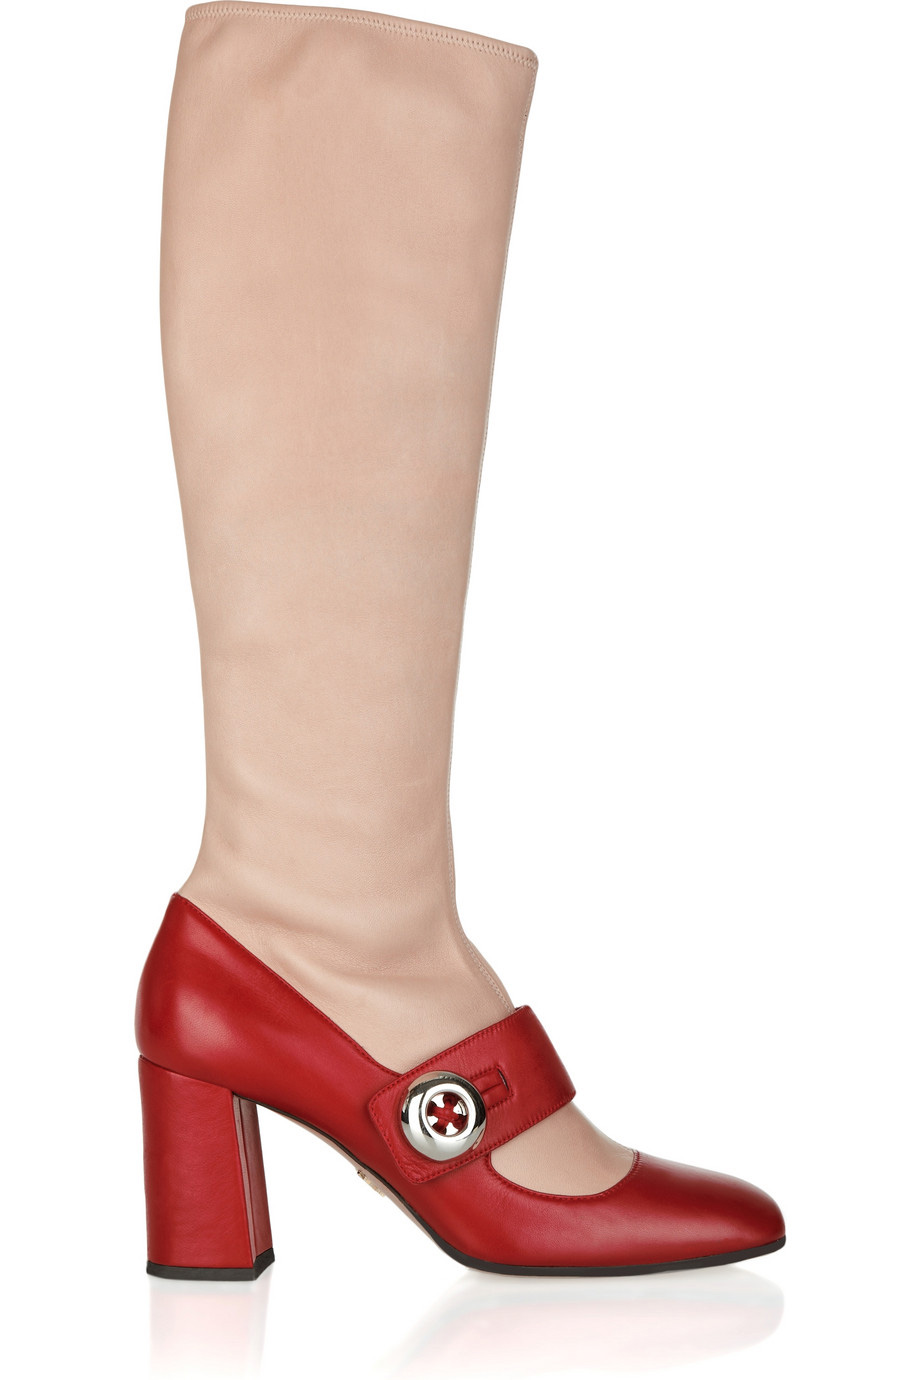 Red and leather Mary Jane boots by Prada